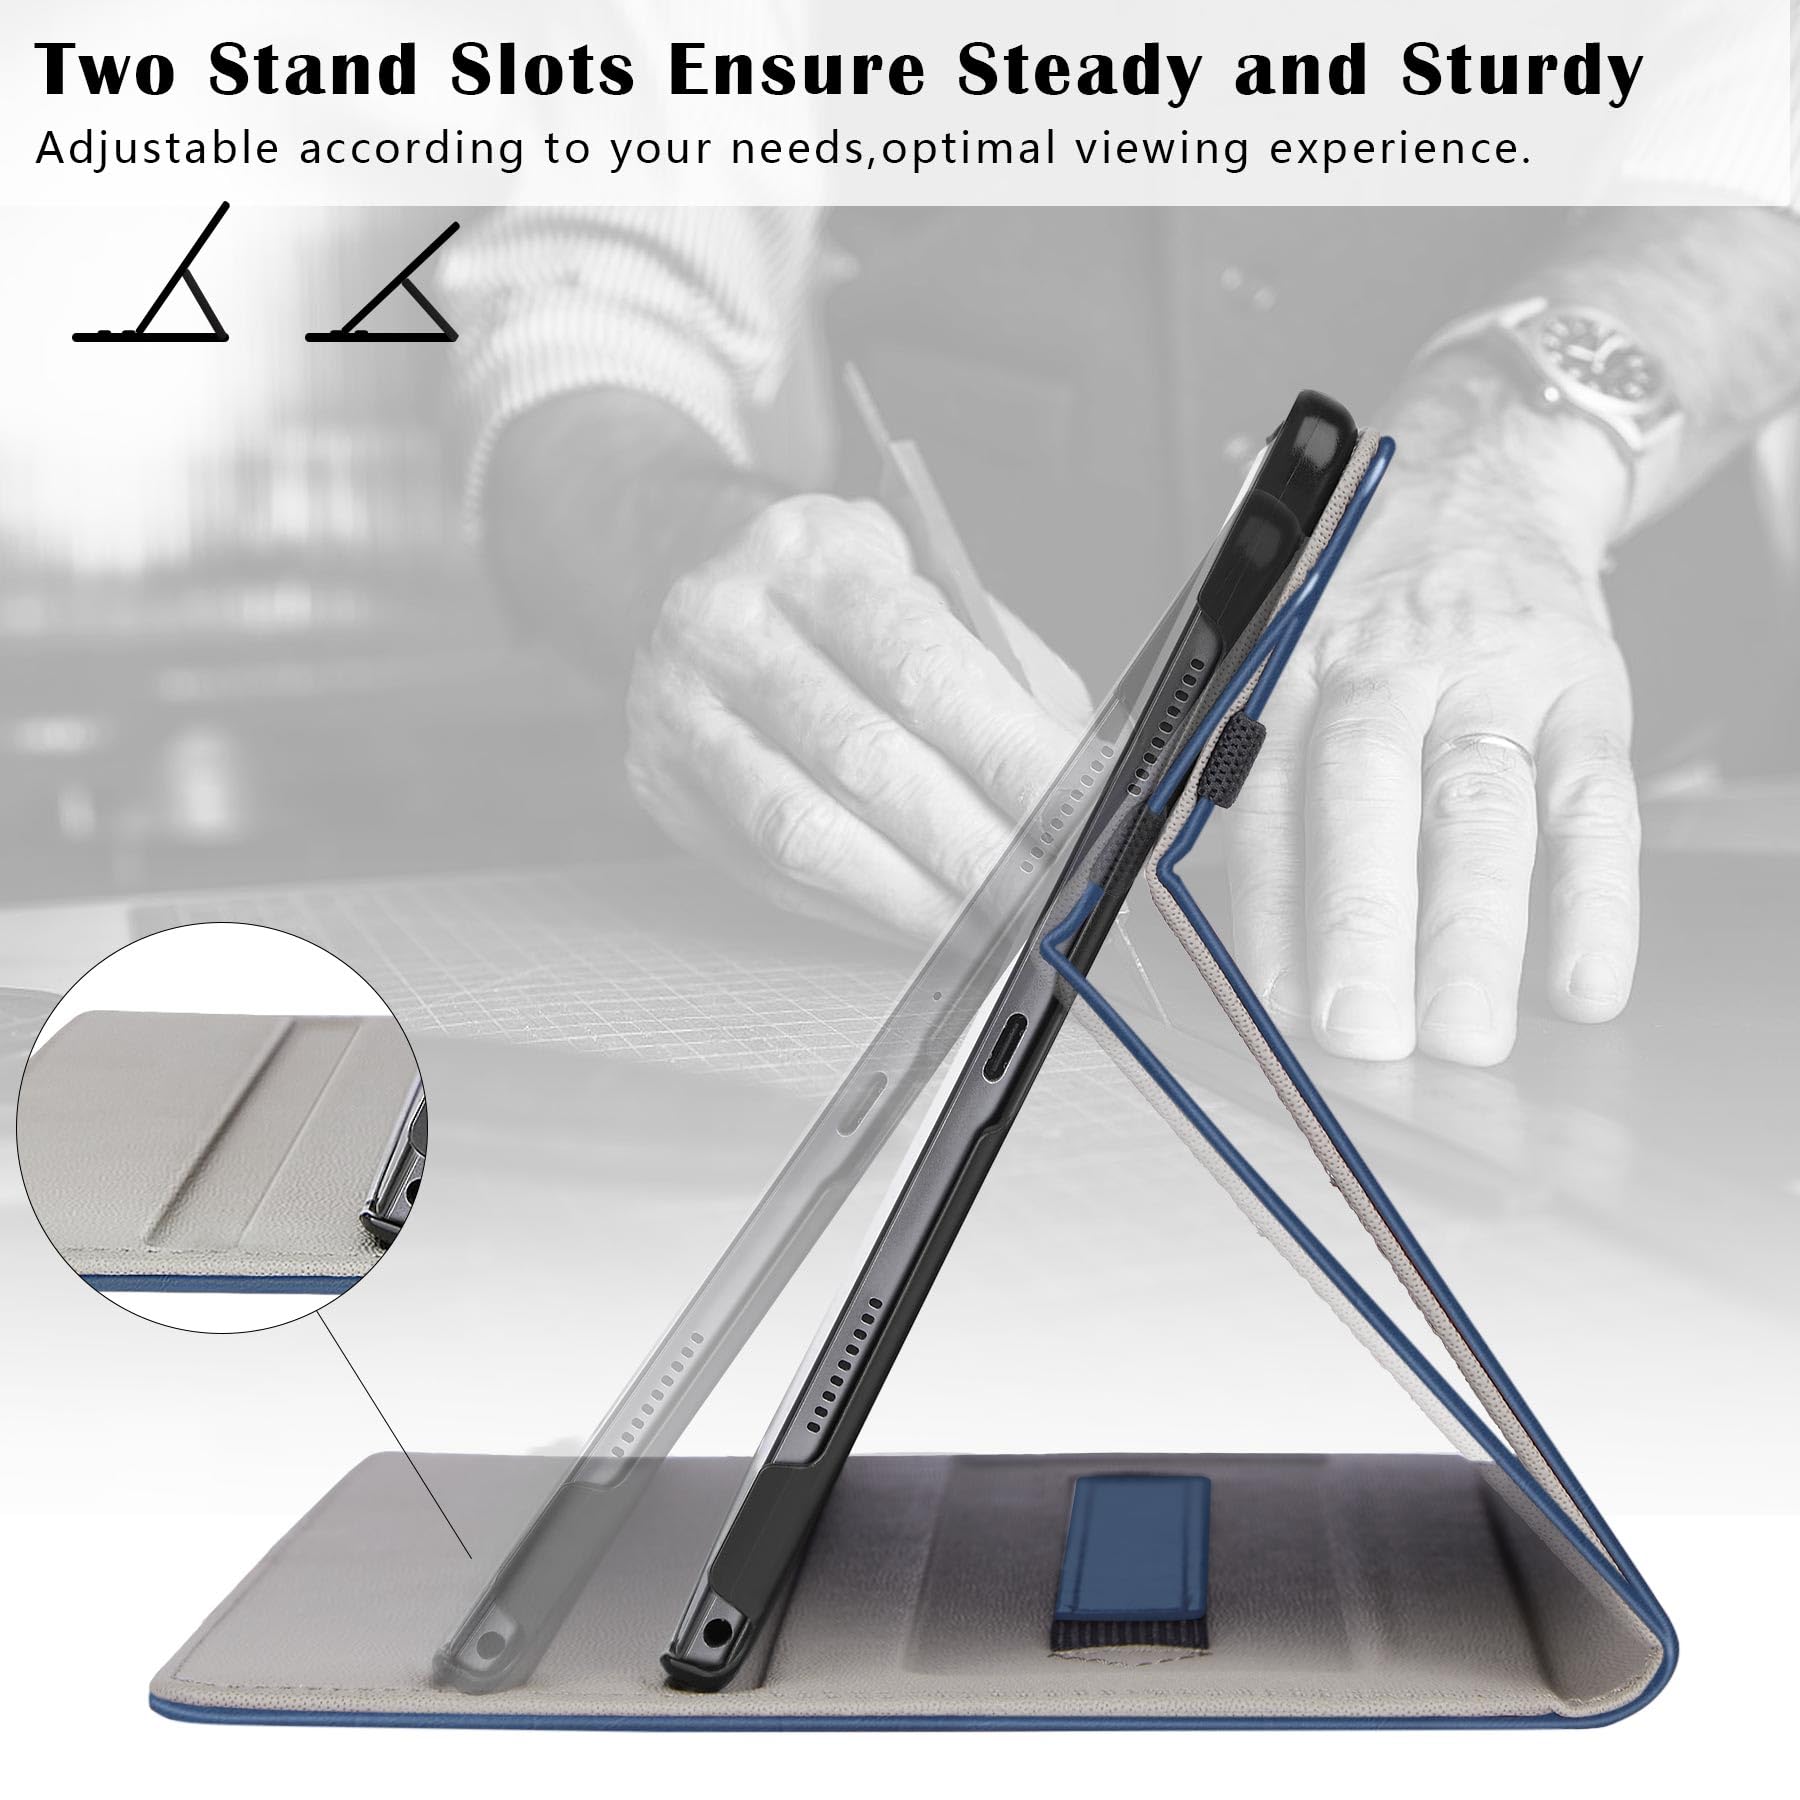 ZtotopCases for Samsung Galaxy Tab A9 Case 2023, Premium PU Leather Business Stand Folio Cover with Multiple Viewing Angles for Samsung A9 Tablet, Blue